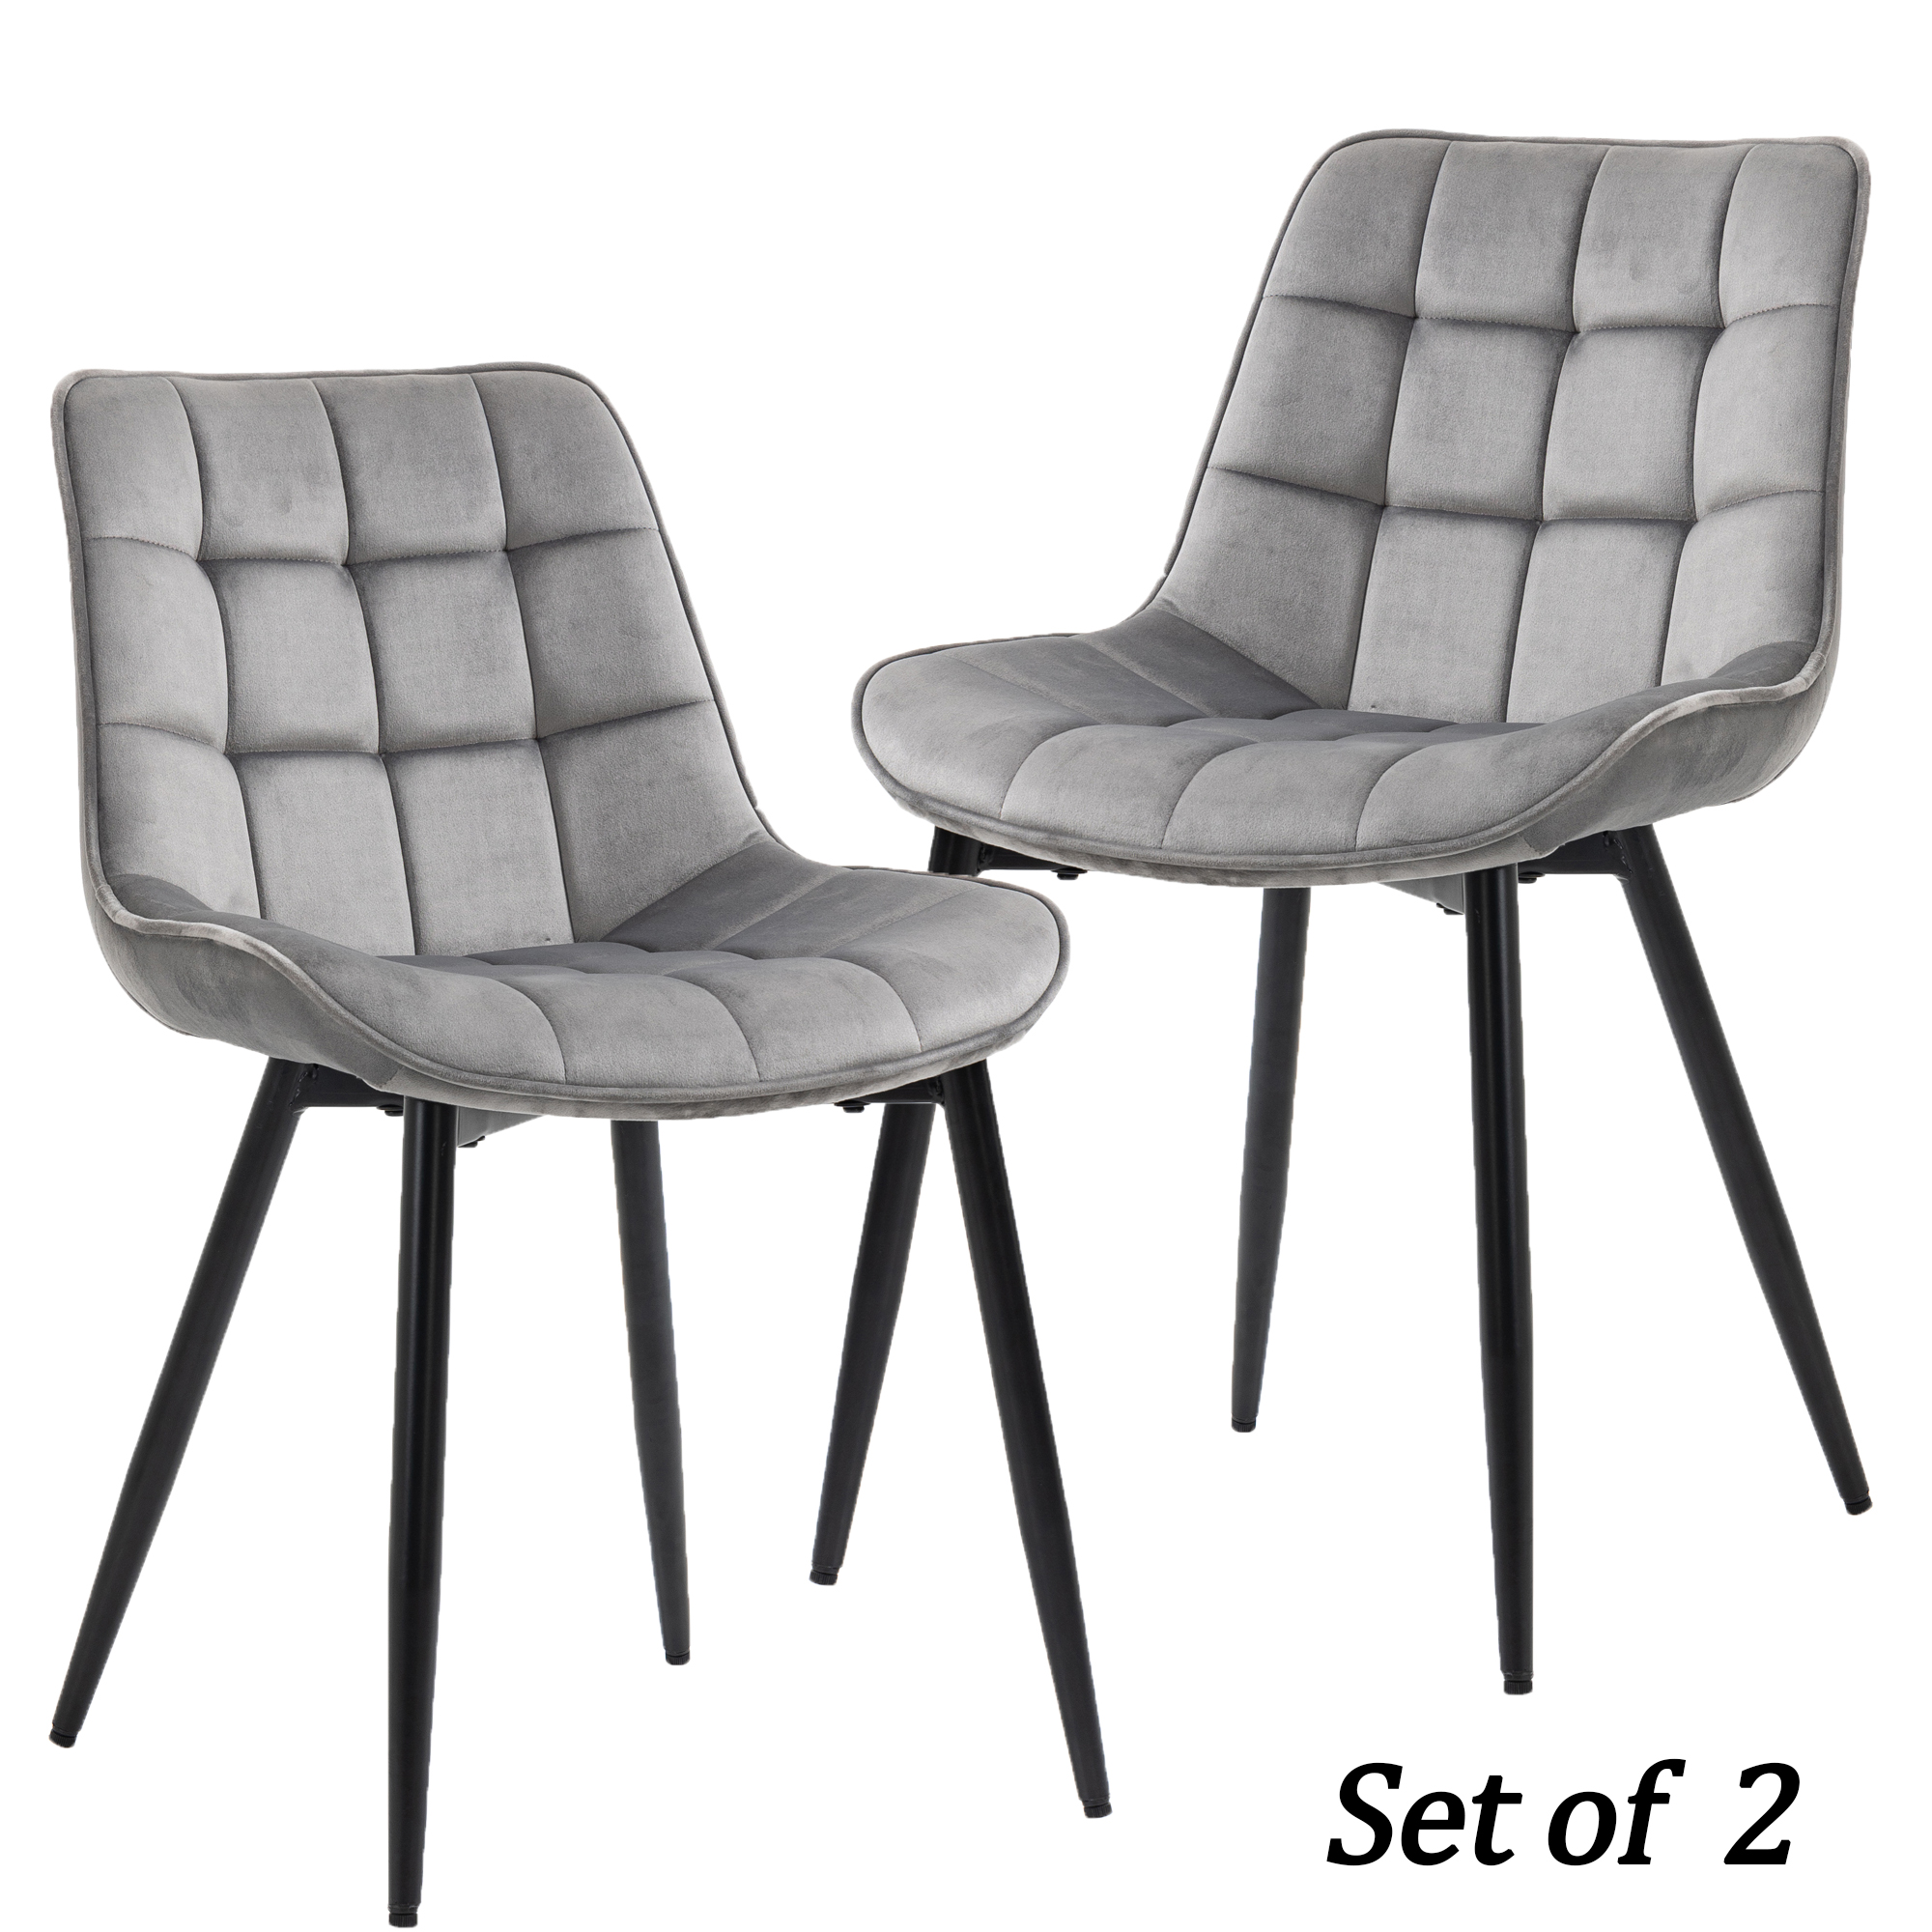 Dining Chairs Set of 2,Modern Kitchen  Dining Room Chairs,Upholstered Dining Accent Chairs in Velvet Seat and Sturdy Metal Legs(Gray)-CASAINC